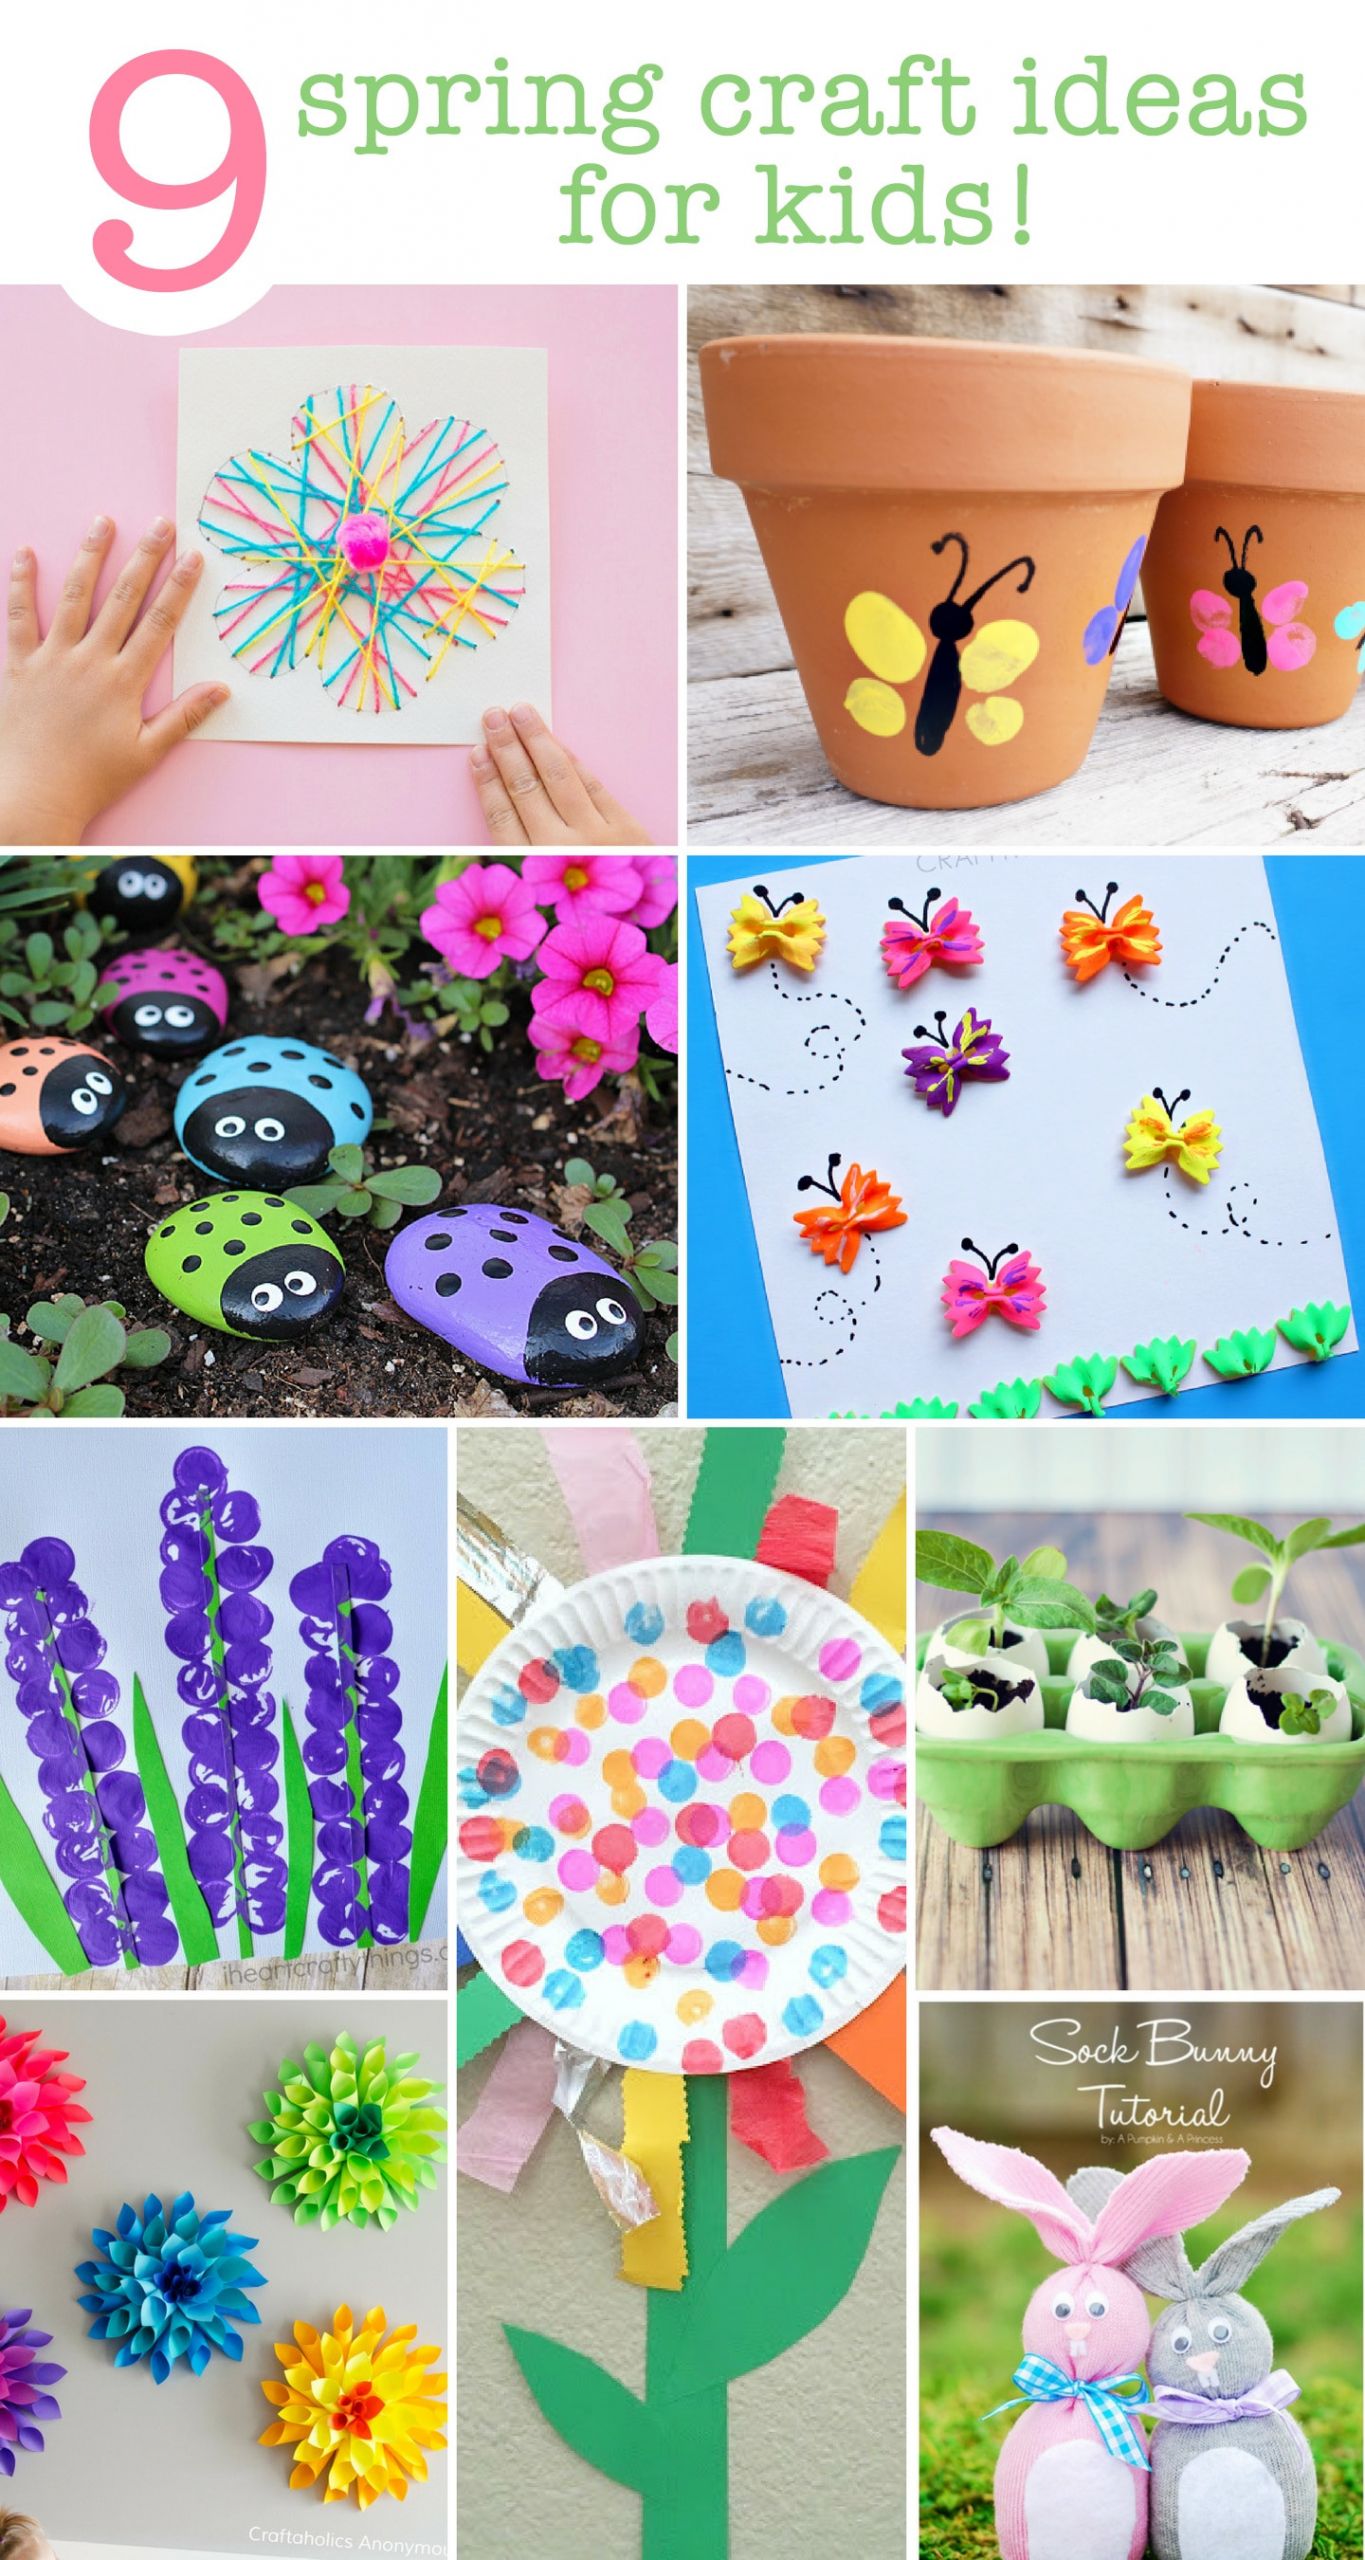 Easy Spring Crafts For Preschoolers
 9 Spring Craft Ideas For The Kids